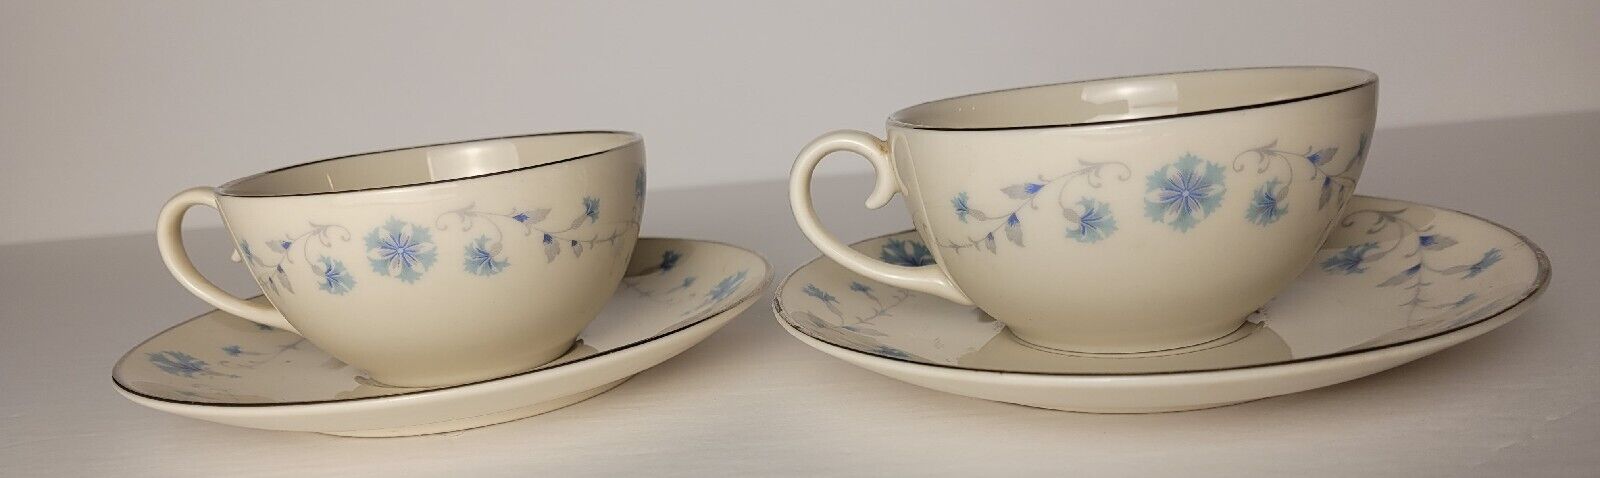 Bluecrest by Triomphe 2 Cups and Saucers